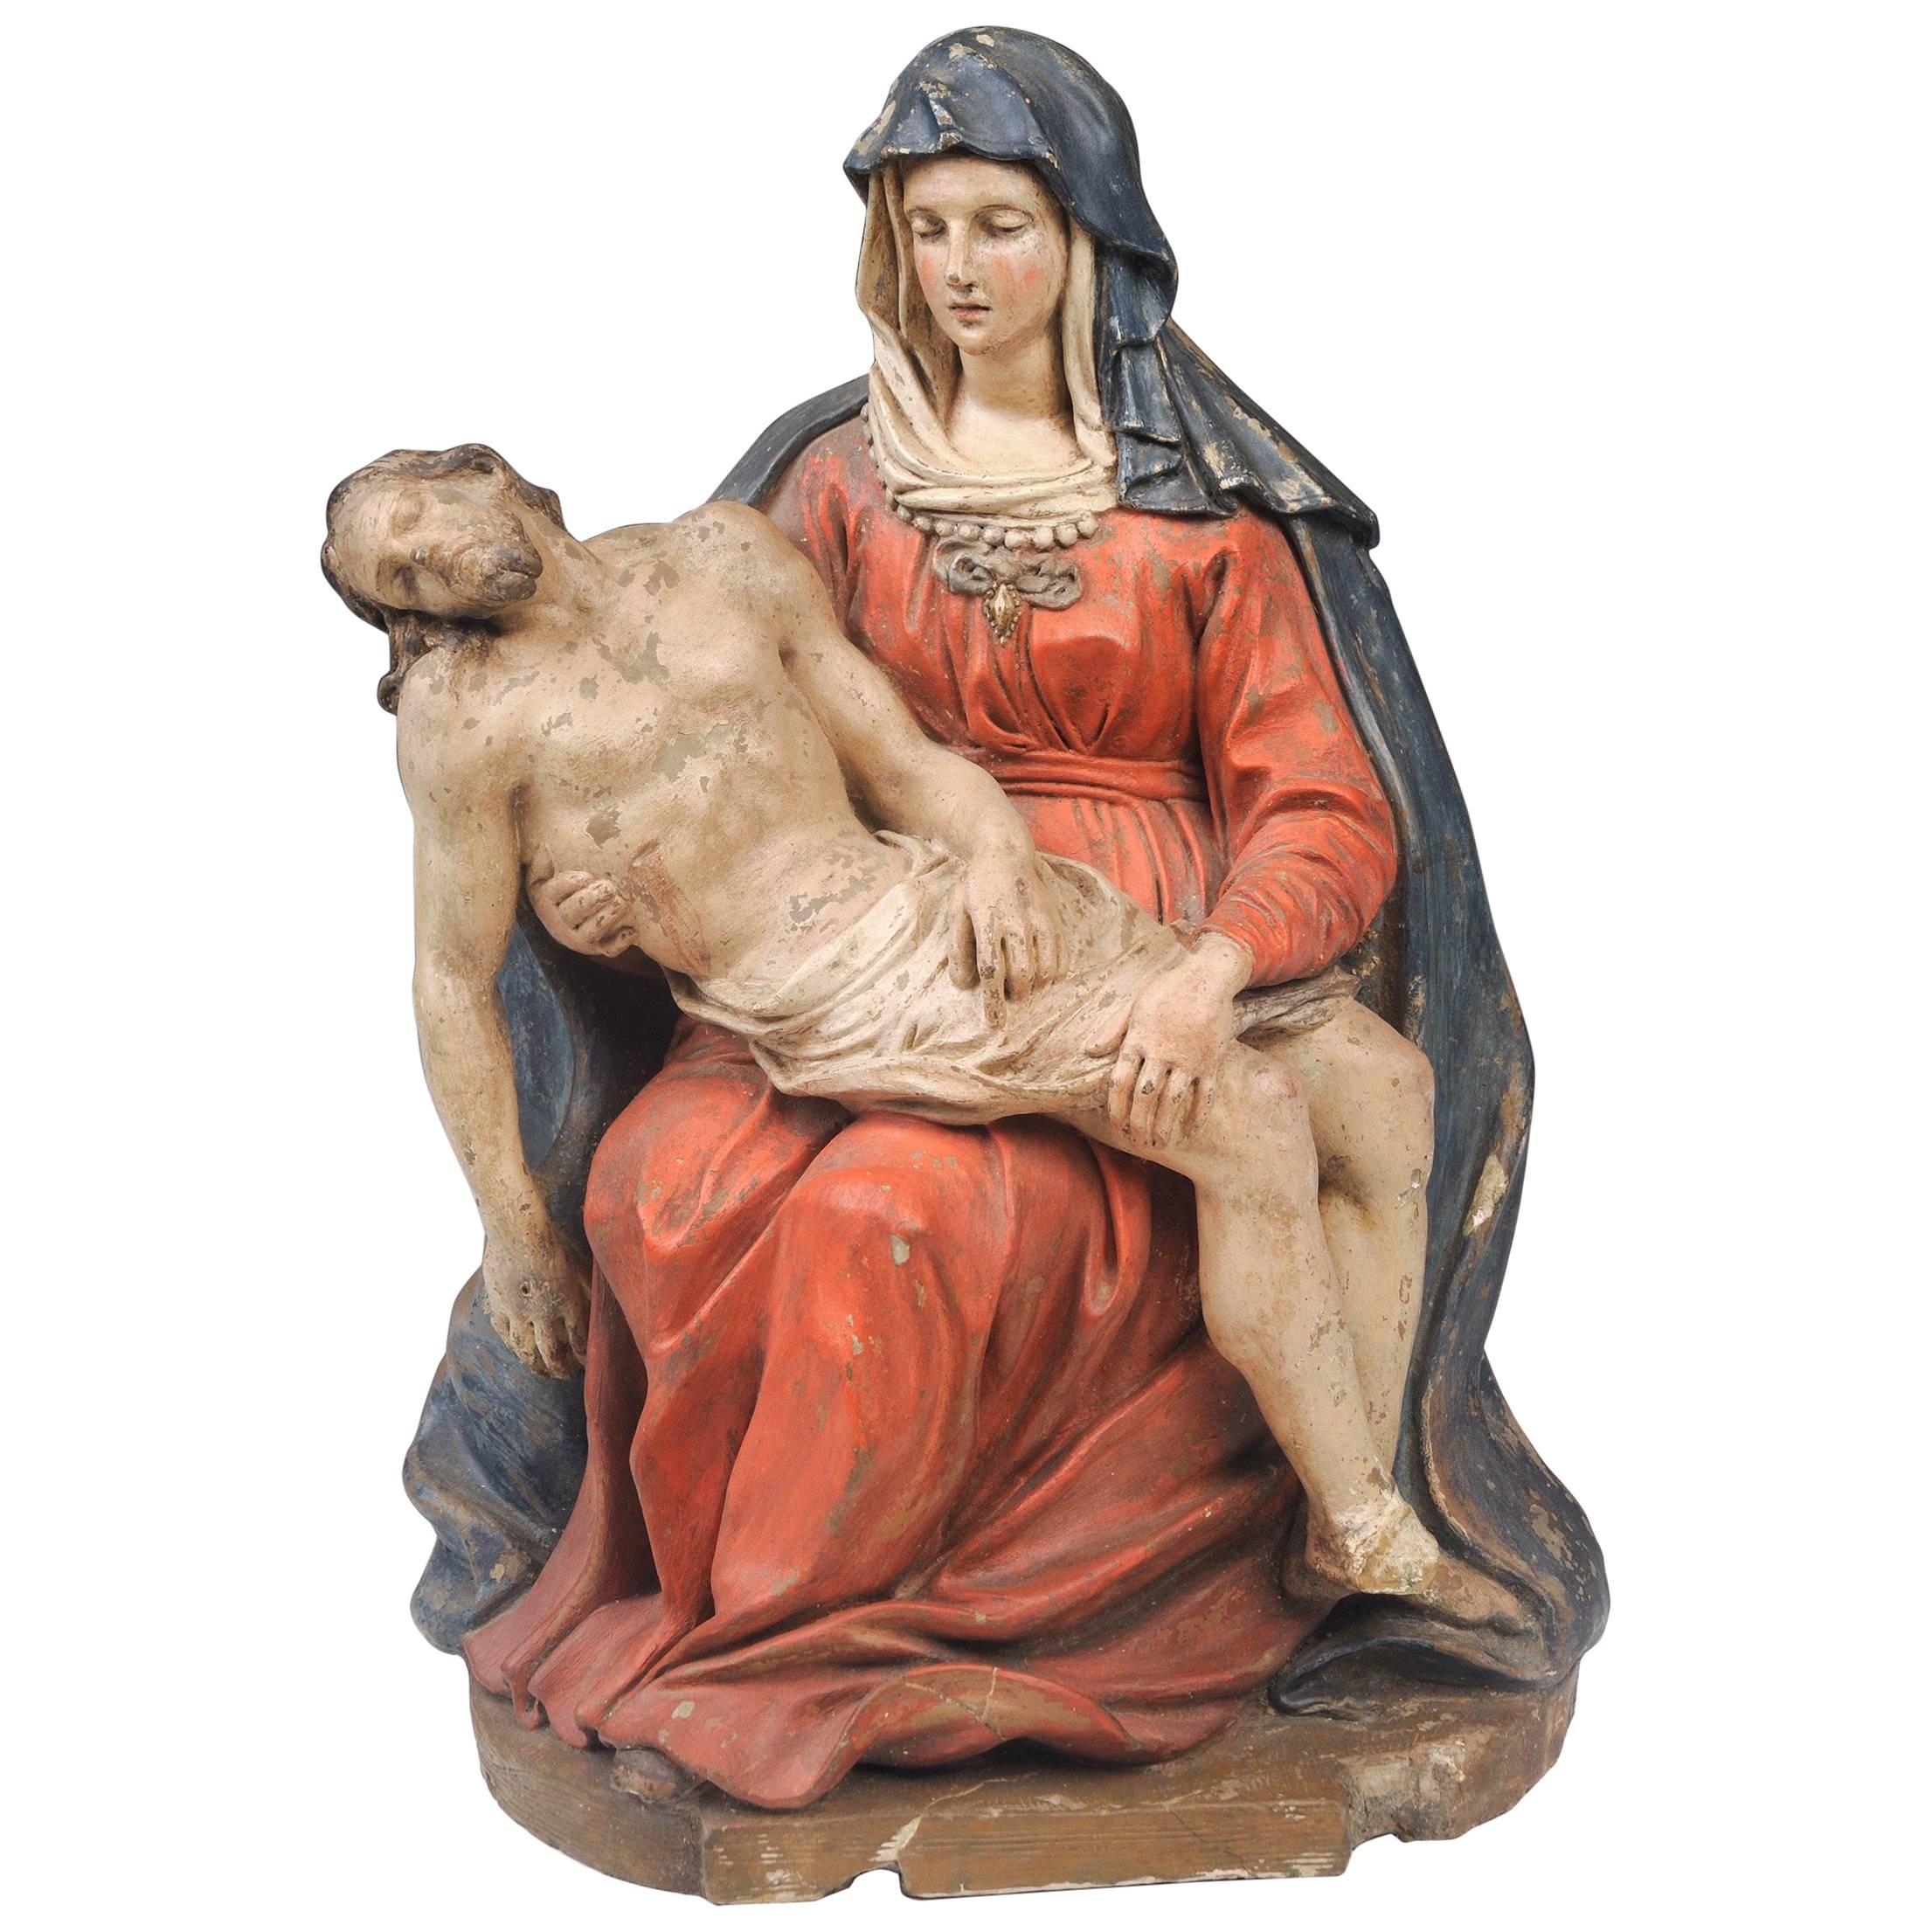 16th Century Pieta, of the Seated Virgin Holding the Body of the Dead Christ